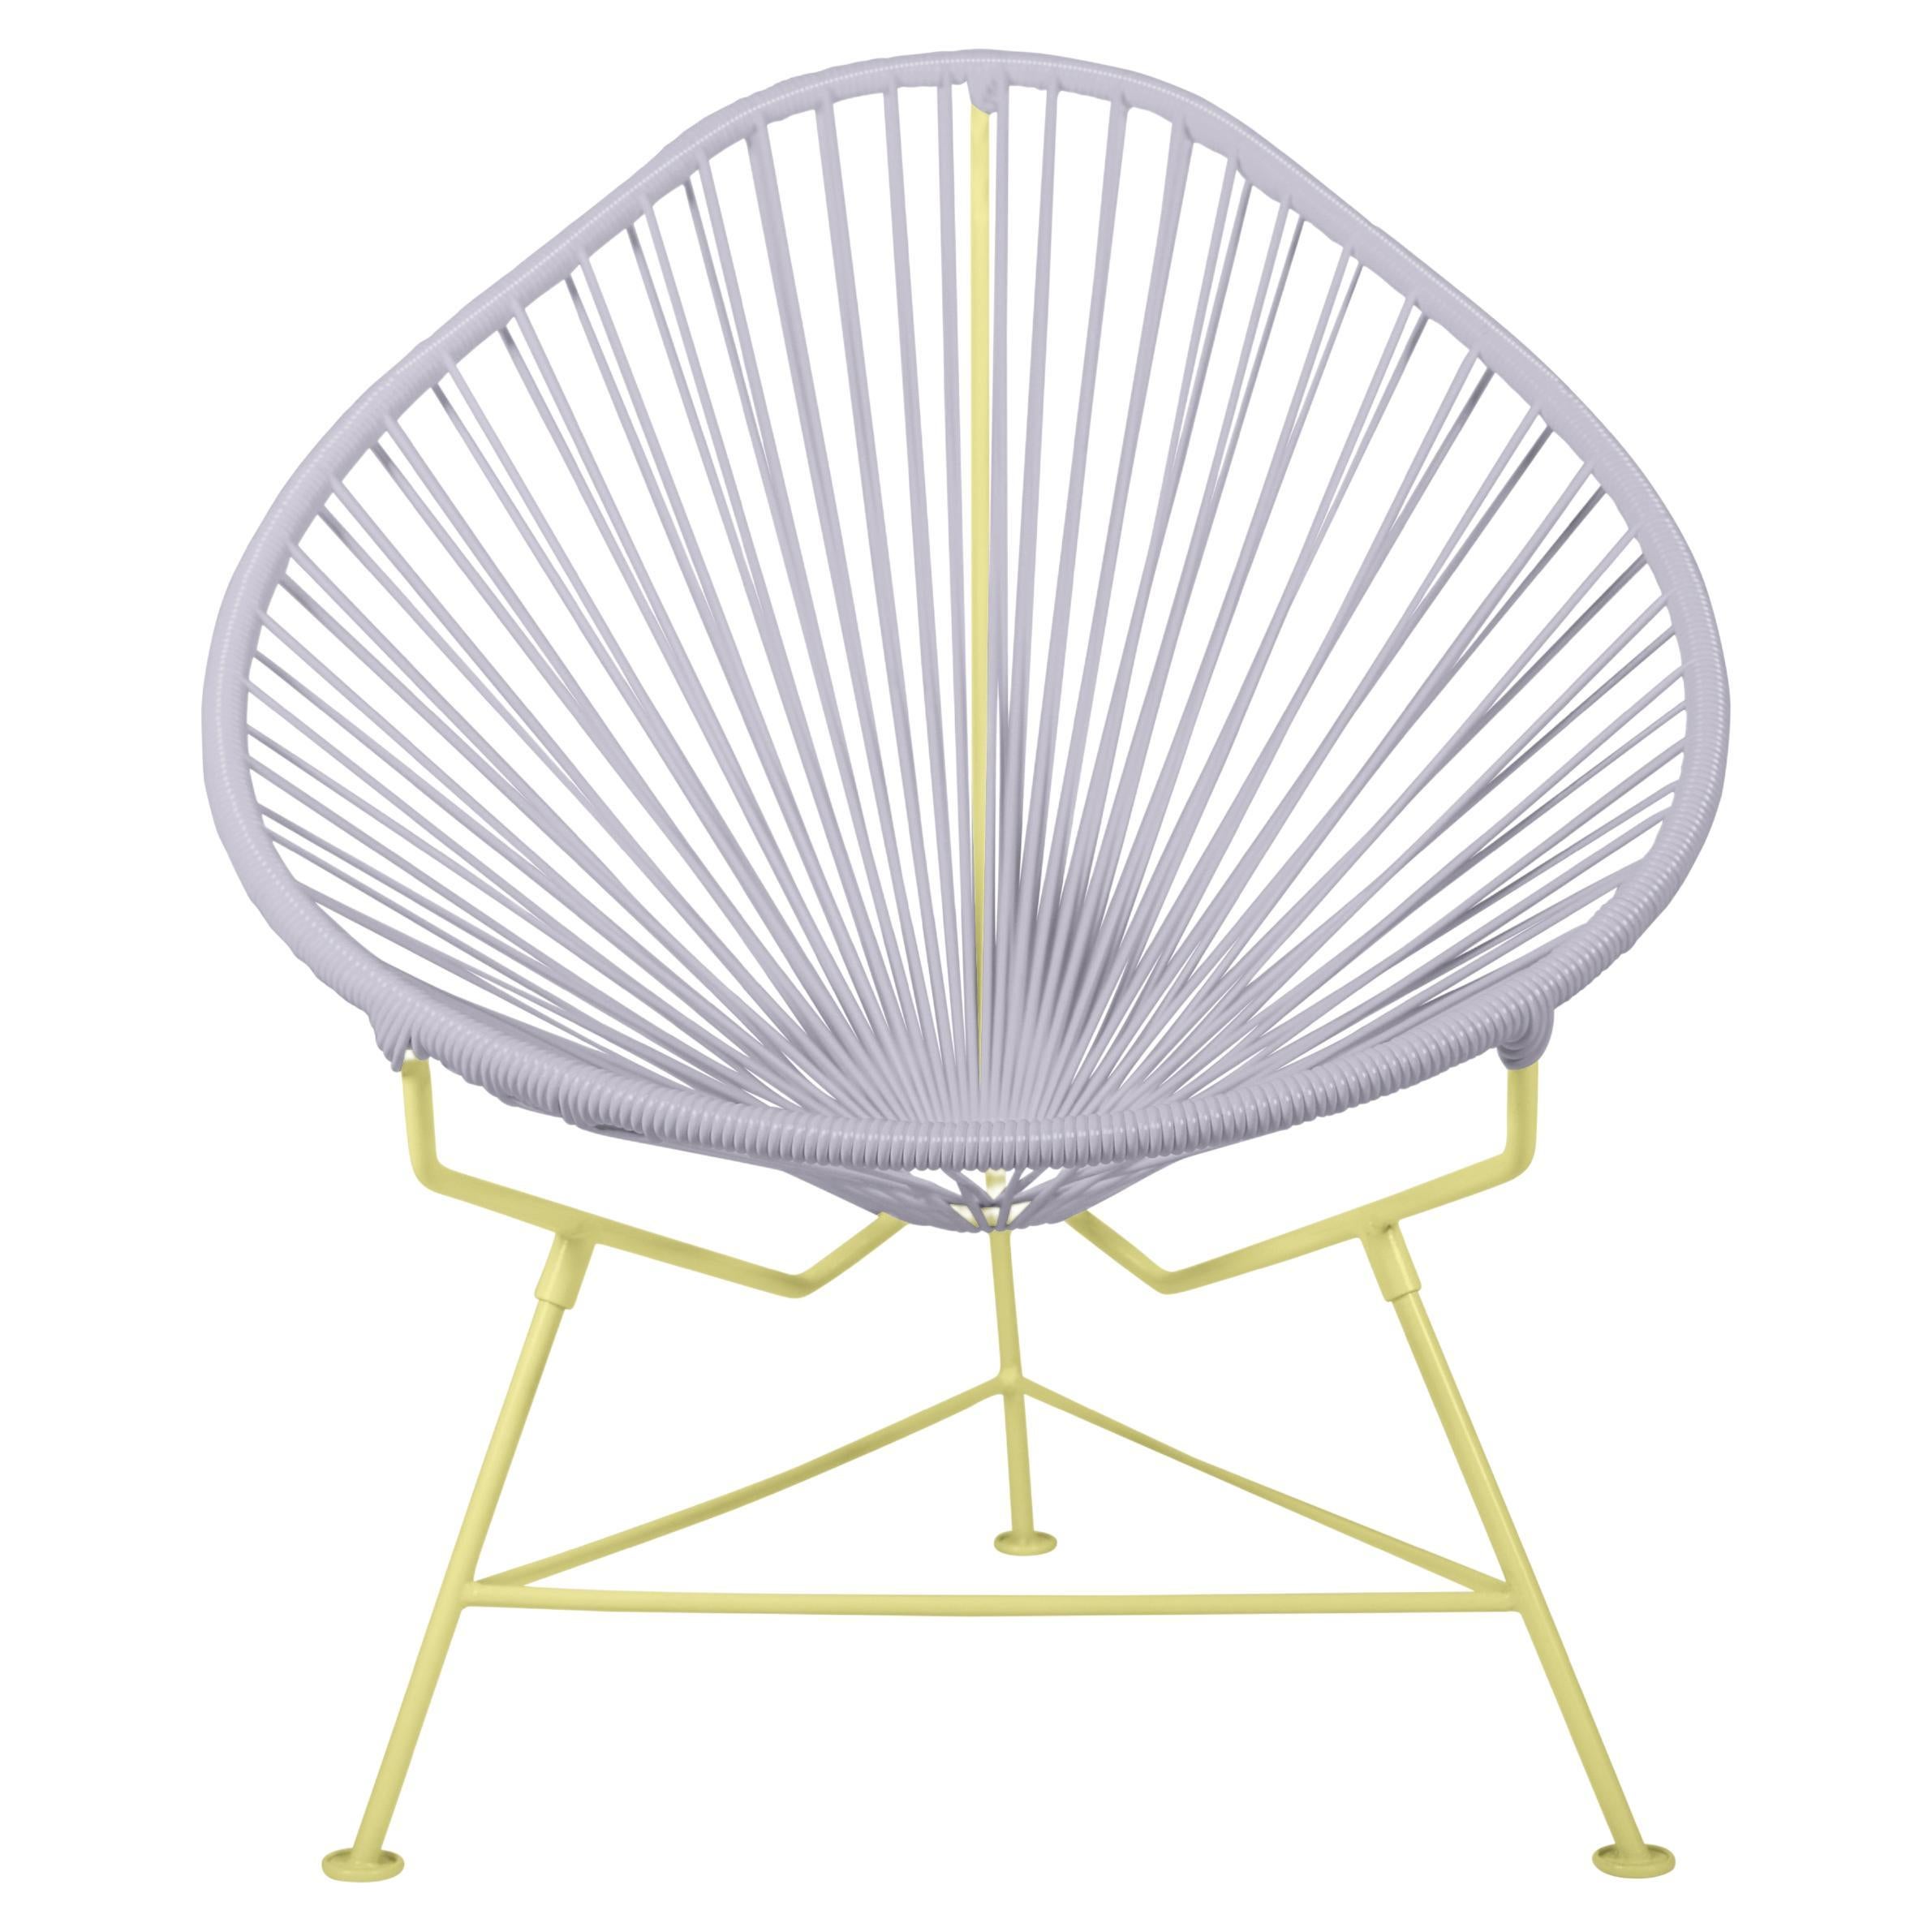 Innit Designs Acapulco Chair Clear Weave on Yellow Frame